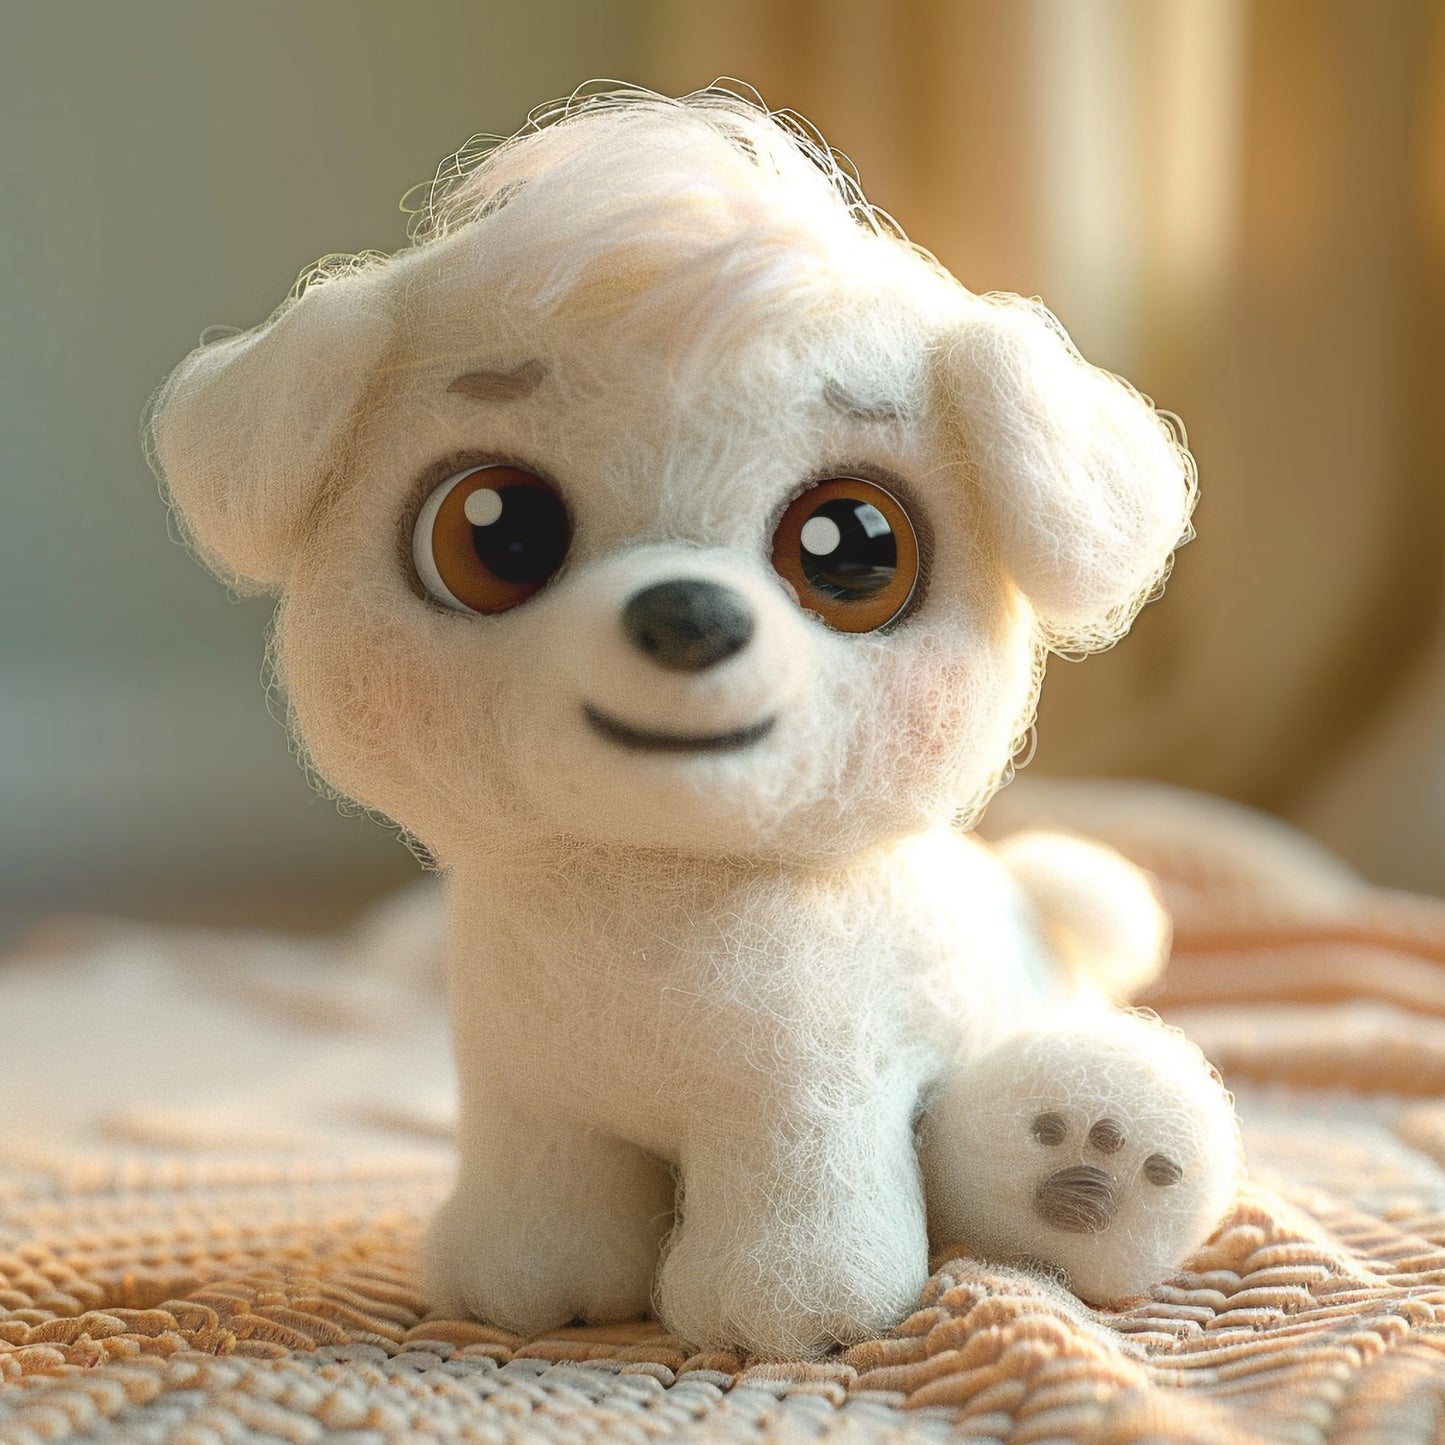 Adorable Fluffy White Toy Dog with Big Brown Eyes